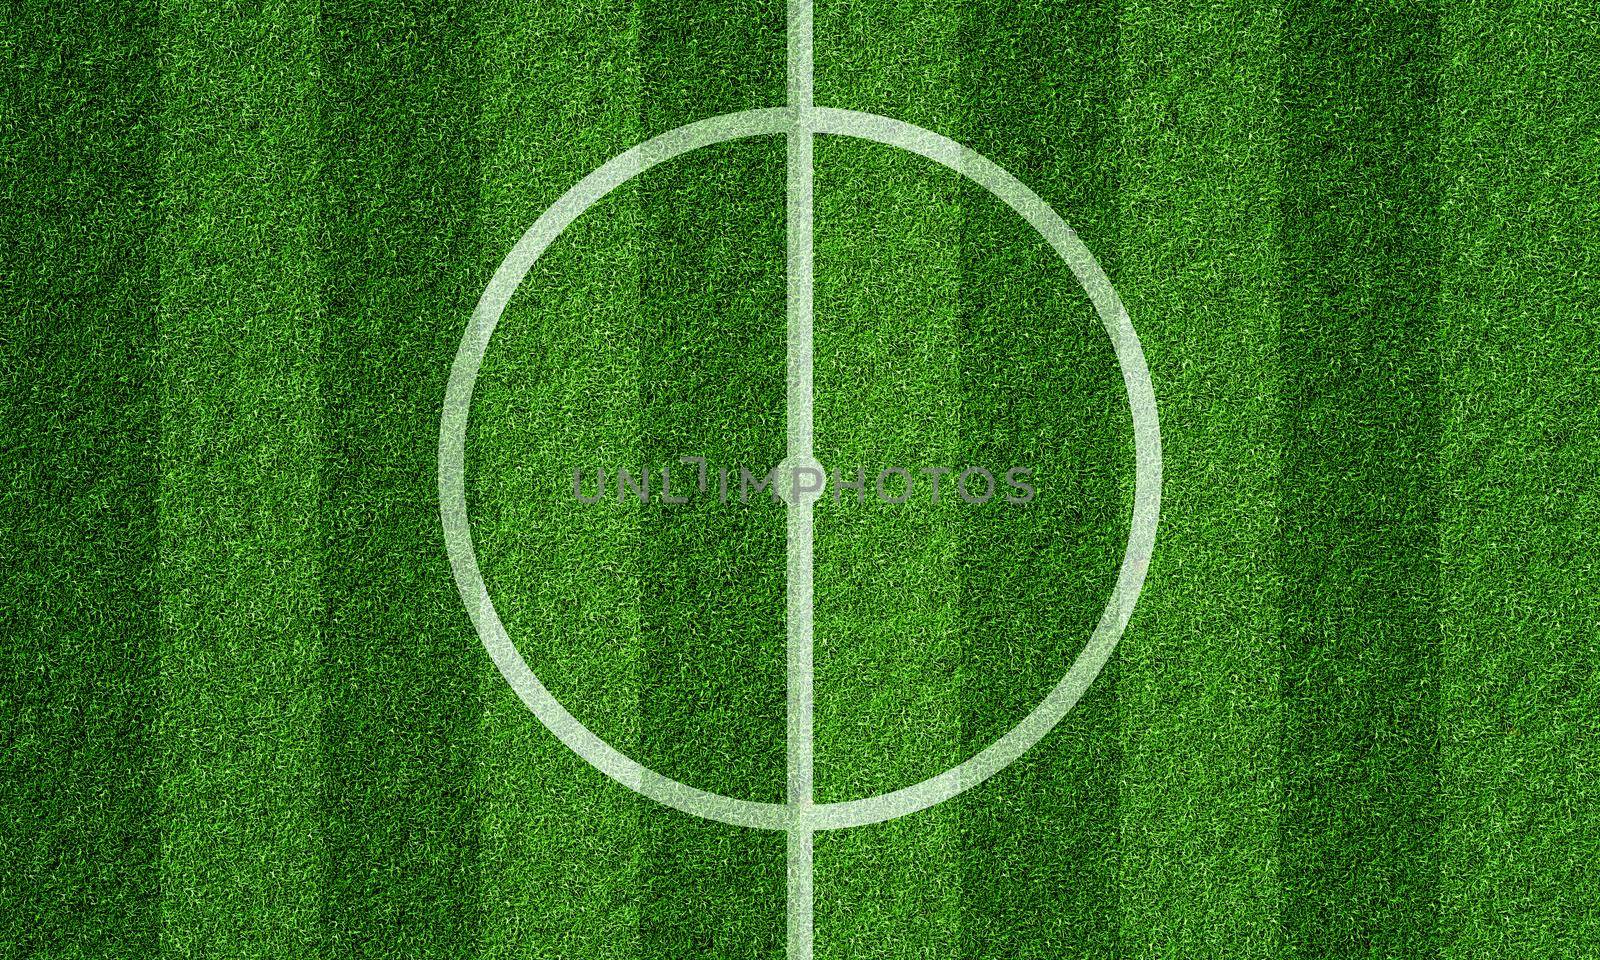 Soccer field in football stadium with line grass pattern and centerline circle. Sports background and athletic wallpaper concept. 3D illustration rendering by MiniStocker